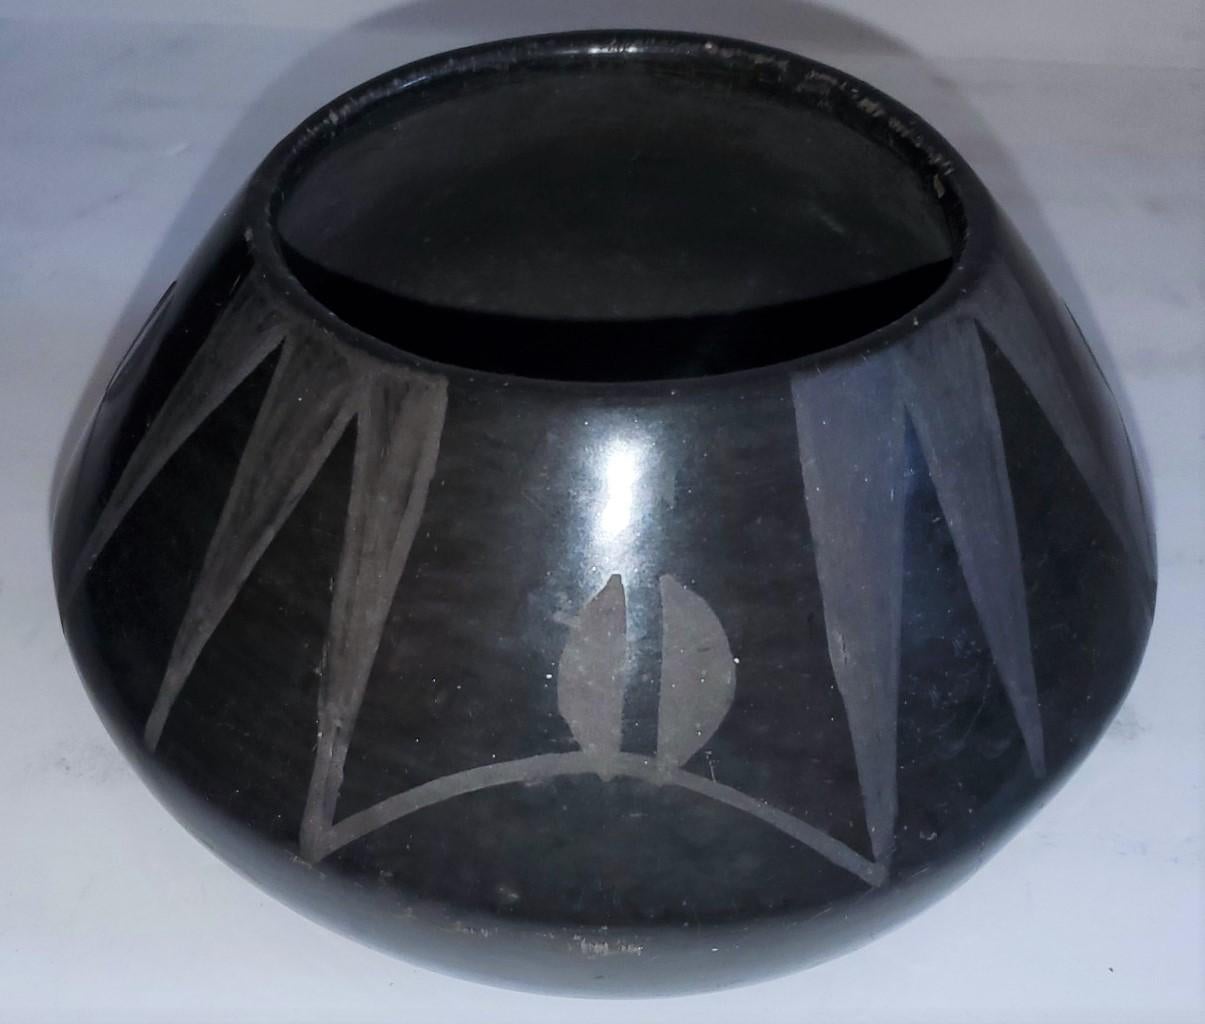 This Native American Indian pot or bowl has a very unusual geometric design. The condition is very good with wear consistent from age and use to the base.